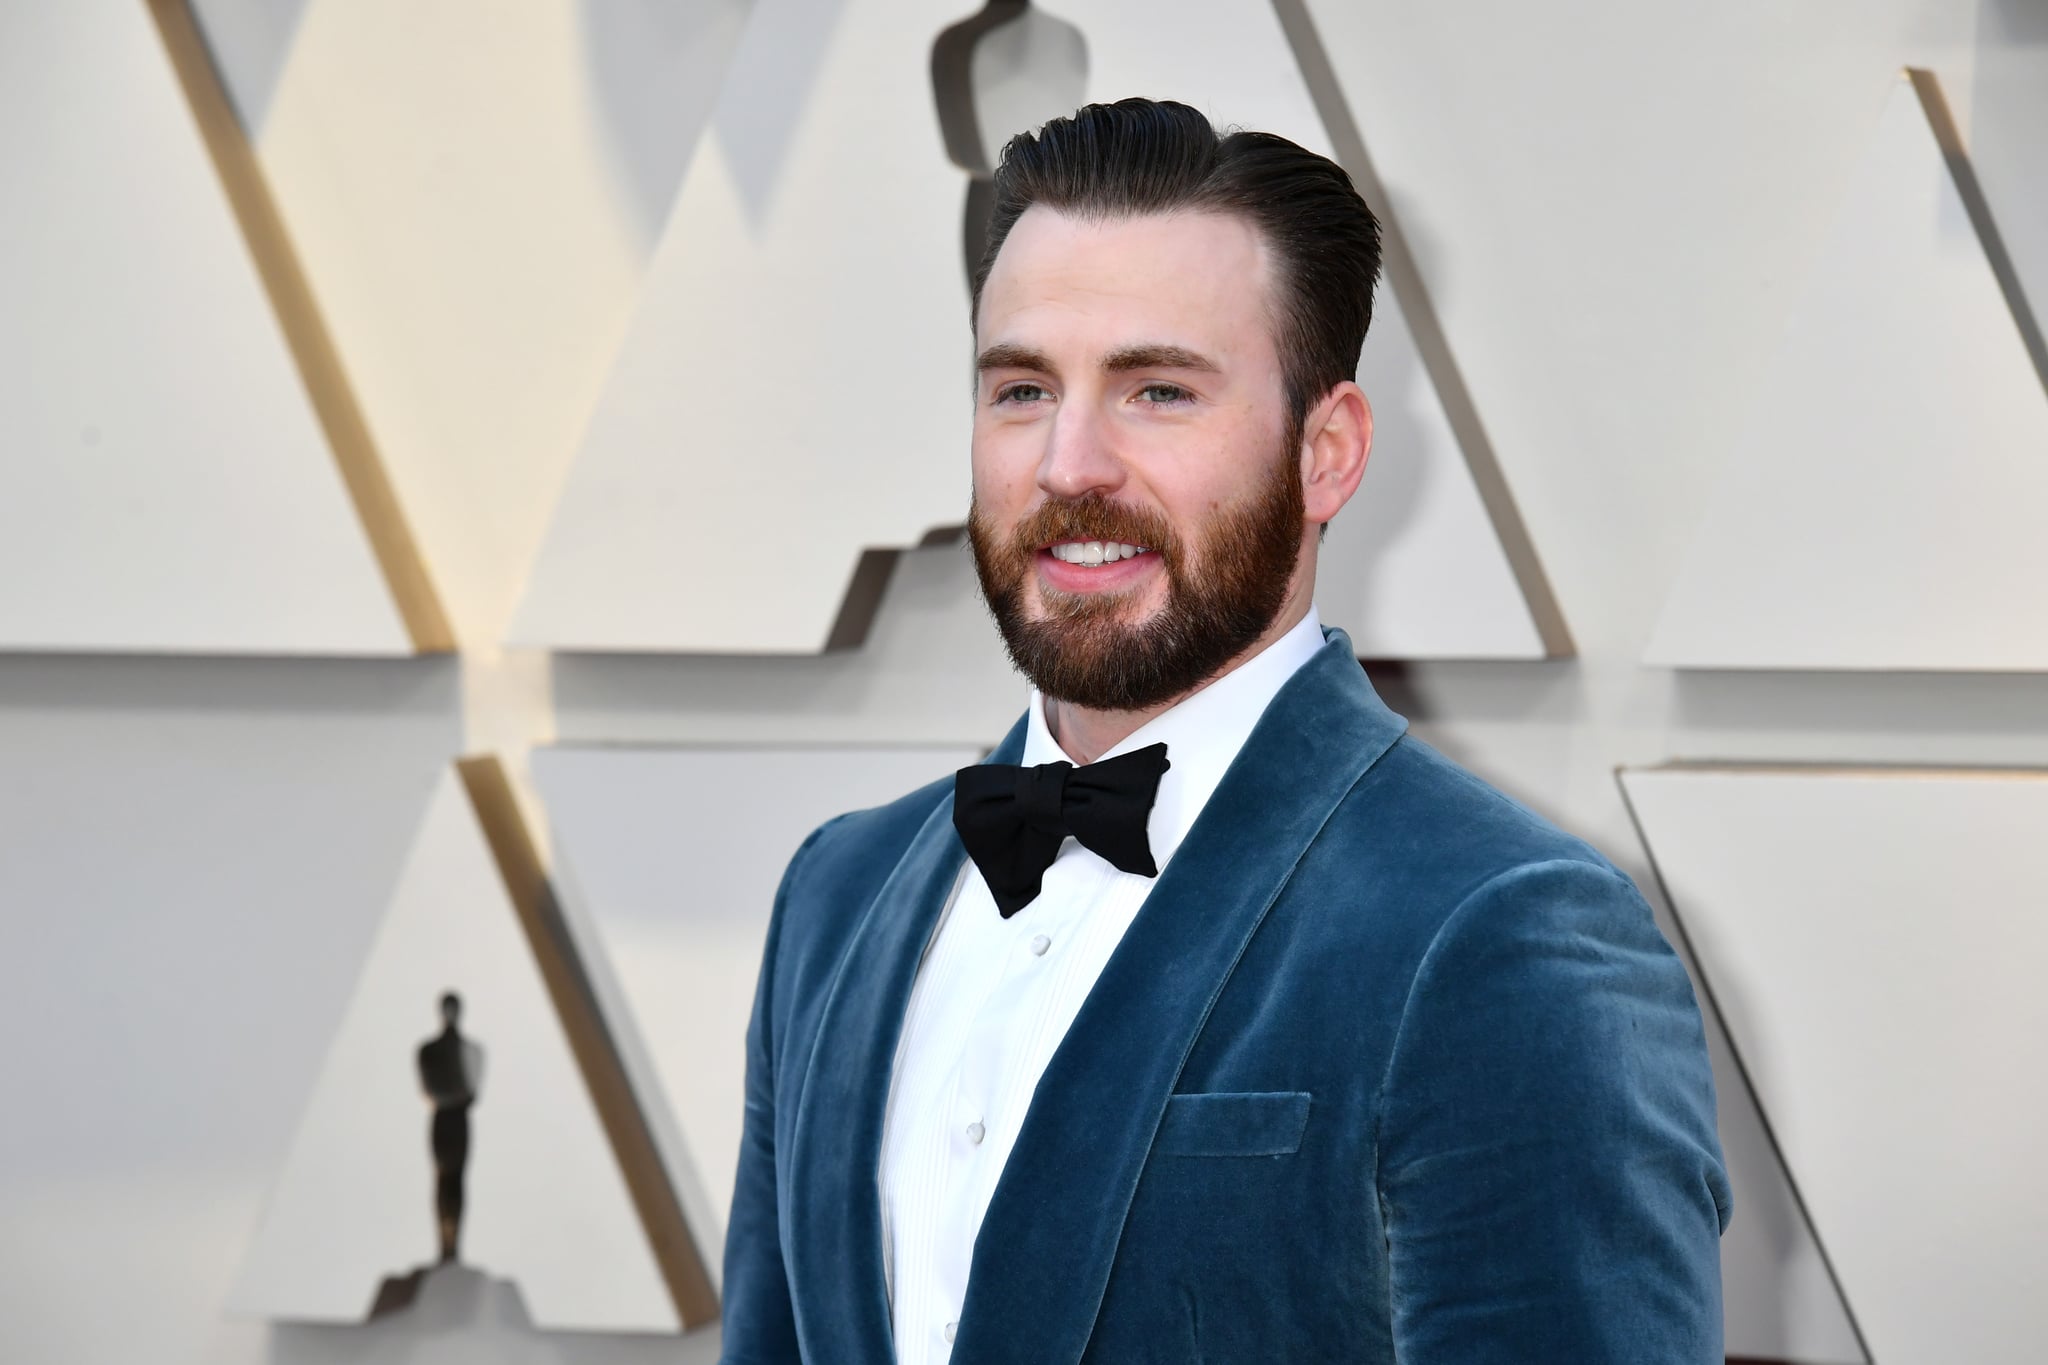 HOLLYWOOD, CA - FEBRUARY 24:  Chris Evans attends the 91st Annual Academy Awards at Hollywood and Highland on February 24, 2019 in Hollywood, California.  (Photo by Jeff Kravitz/FilmMagic)